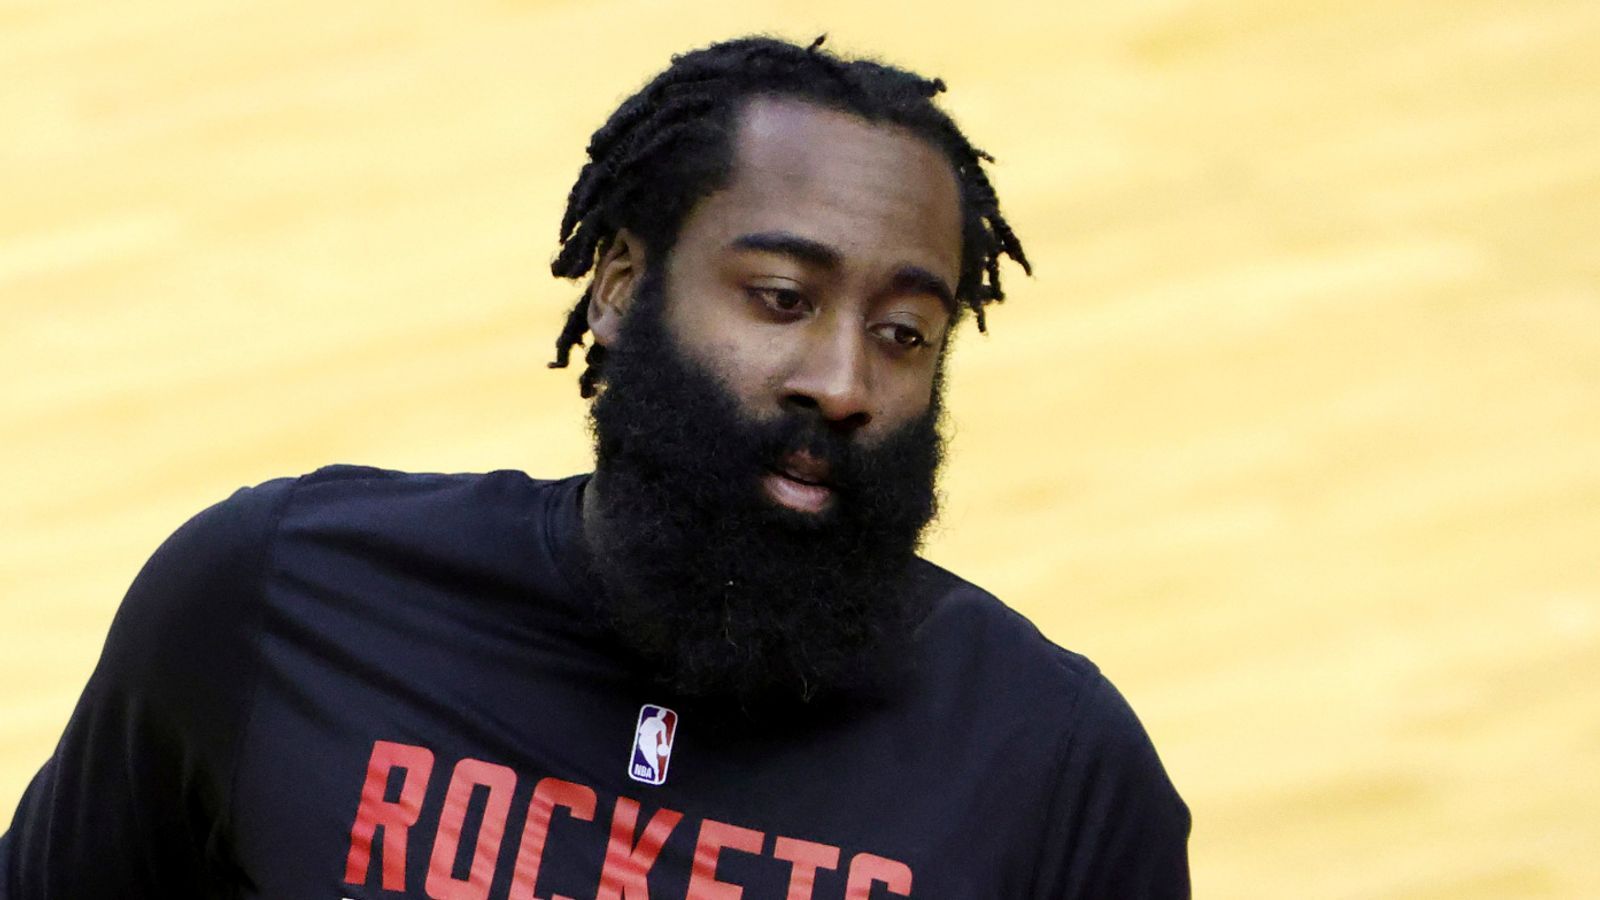 James Harden: Brooklyn Nets to Acquire Houston Rockets Star in Commerce, Reports Show